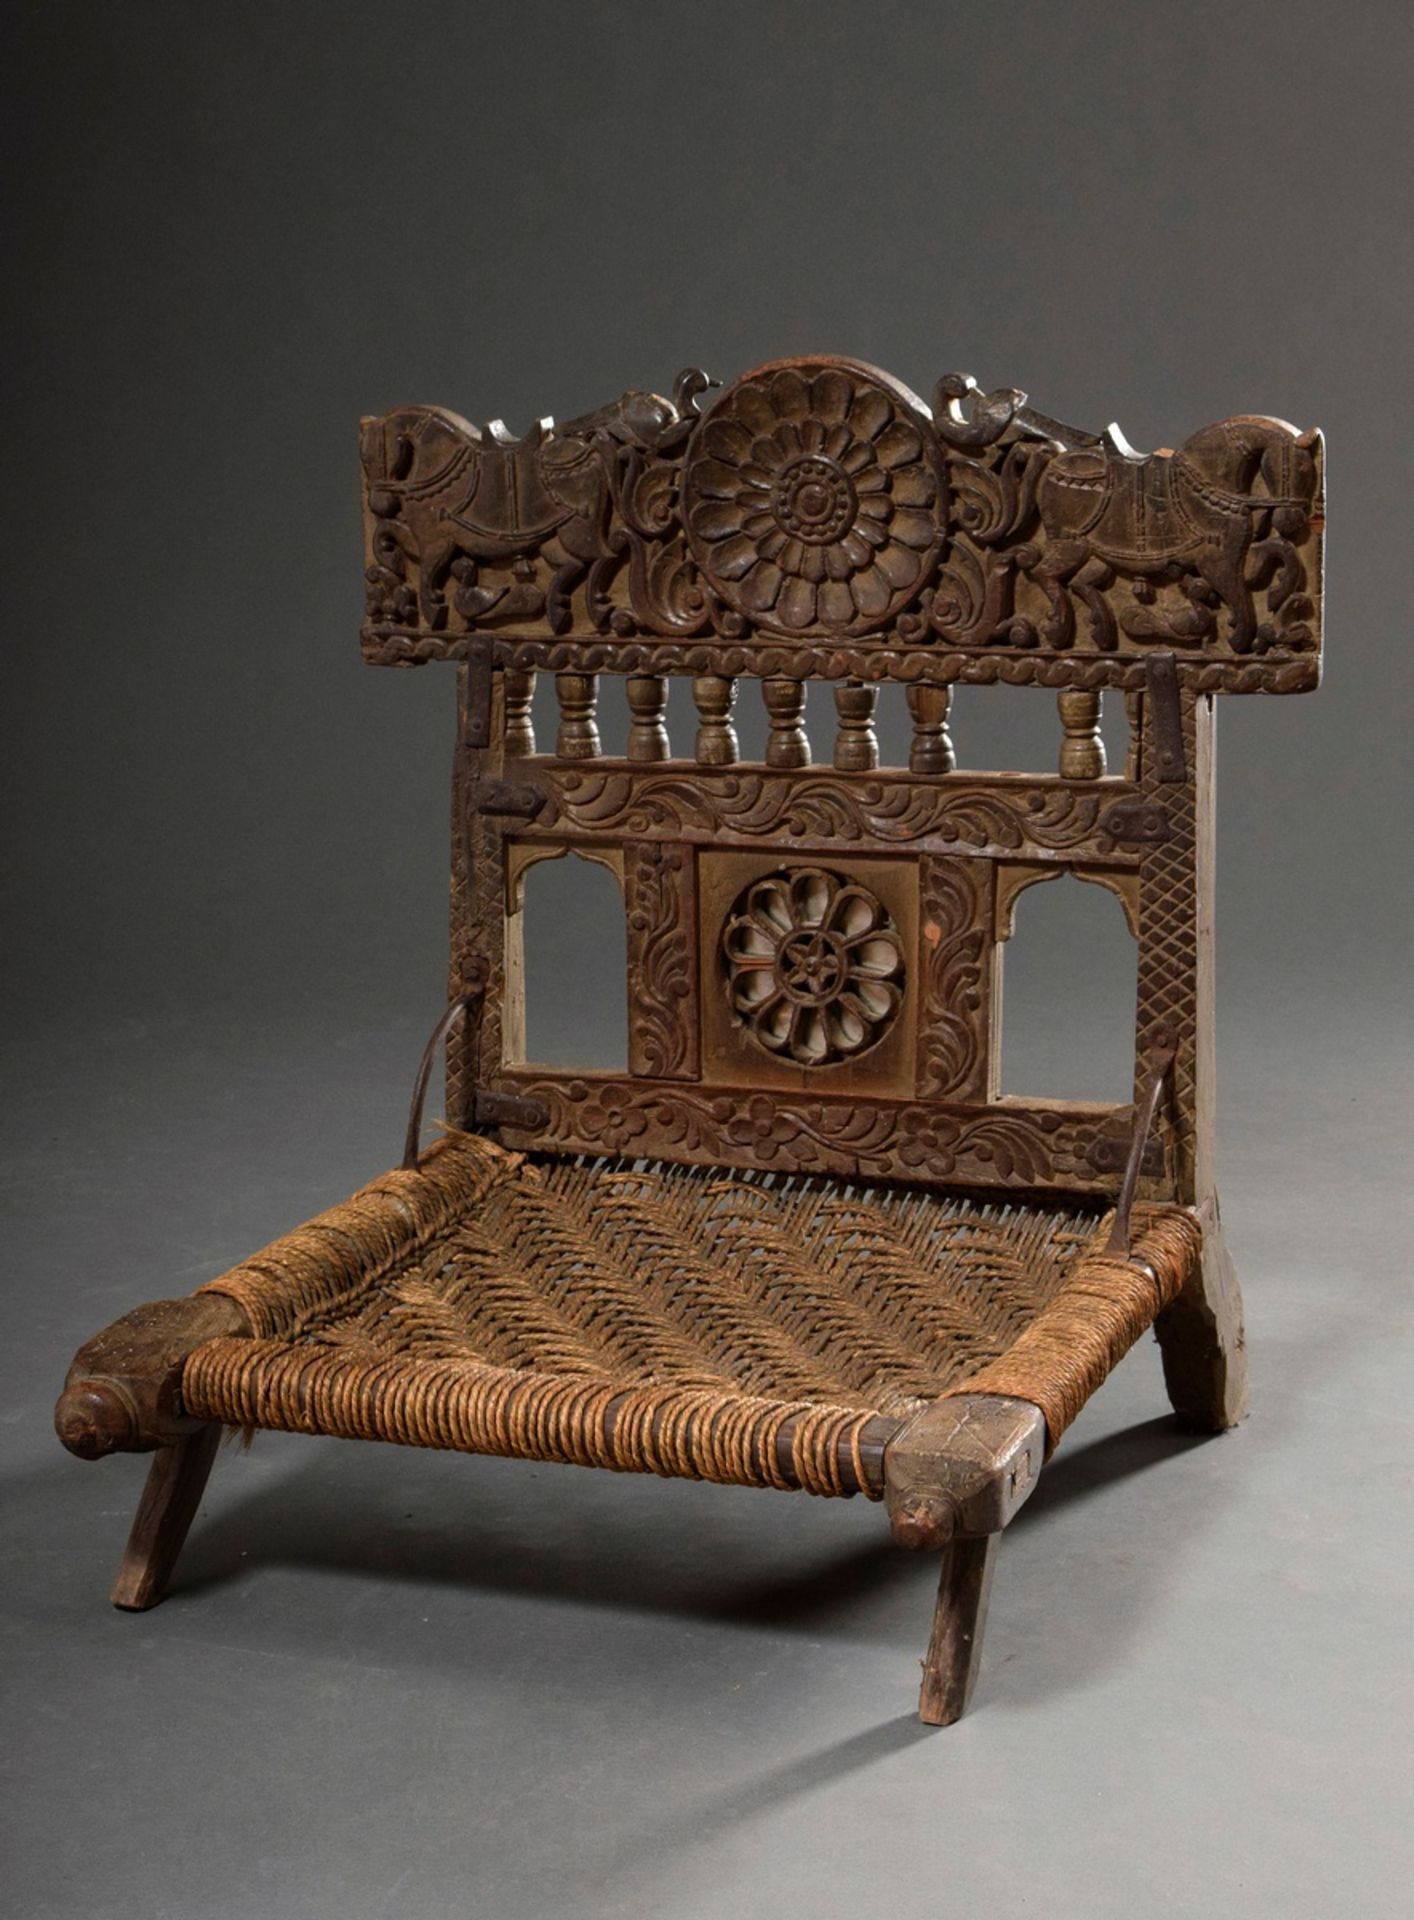 Indian wedding chair with richly carved frame "horses, peacocks and rosettes", around 1900, wood wi - Image 2 of 6